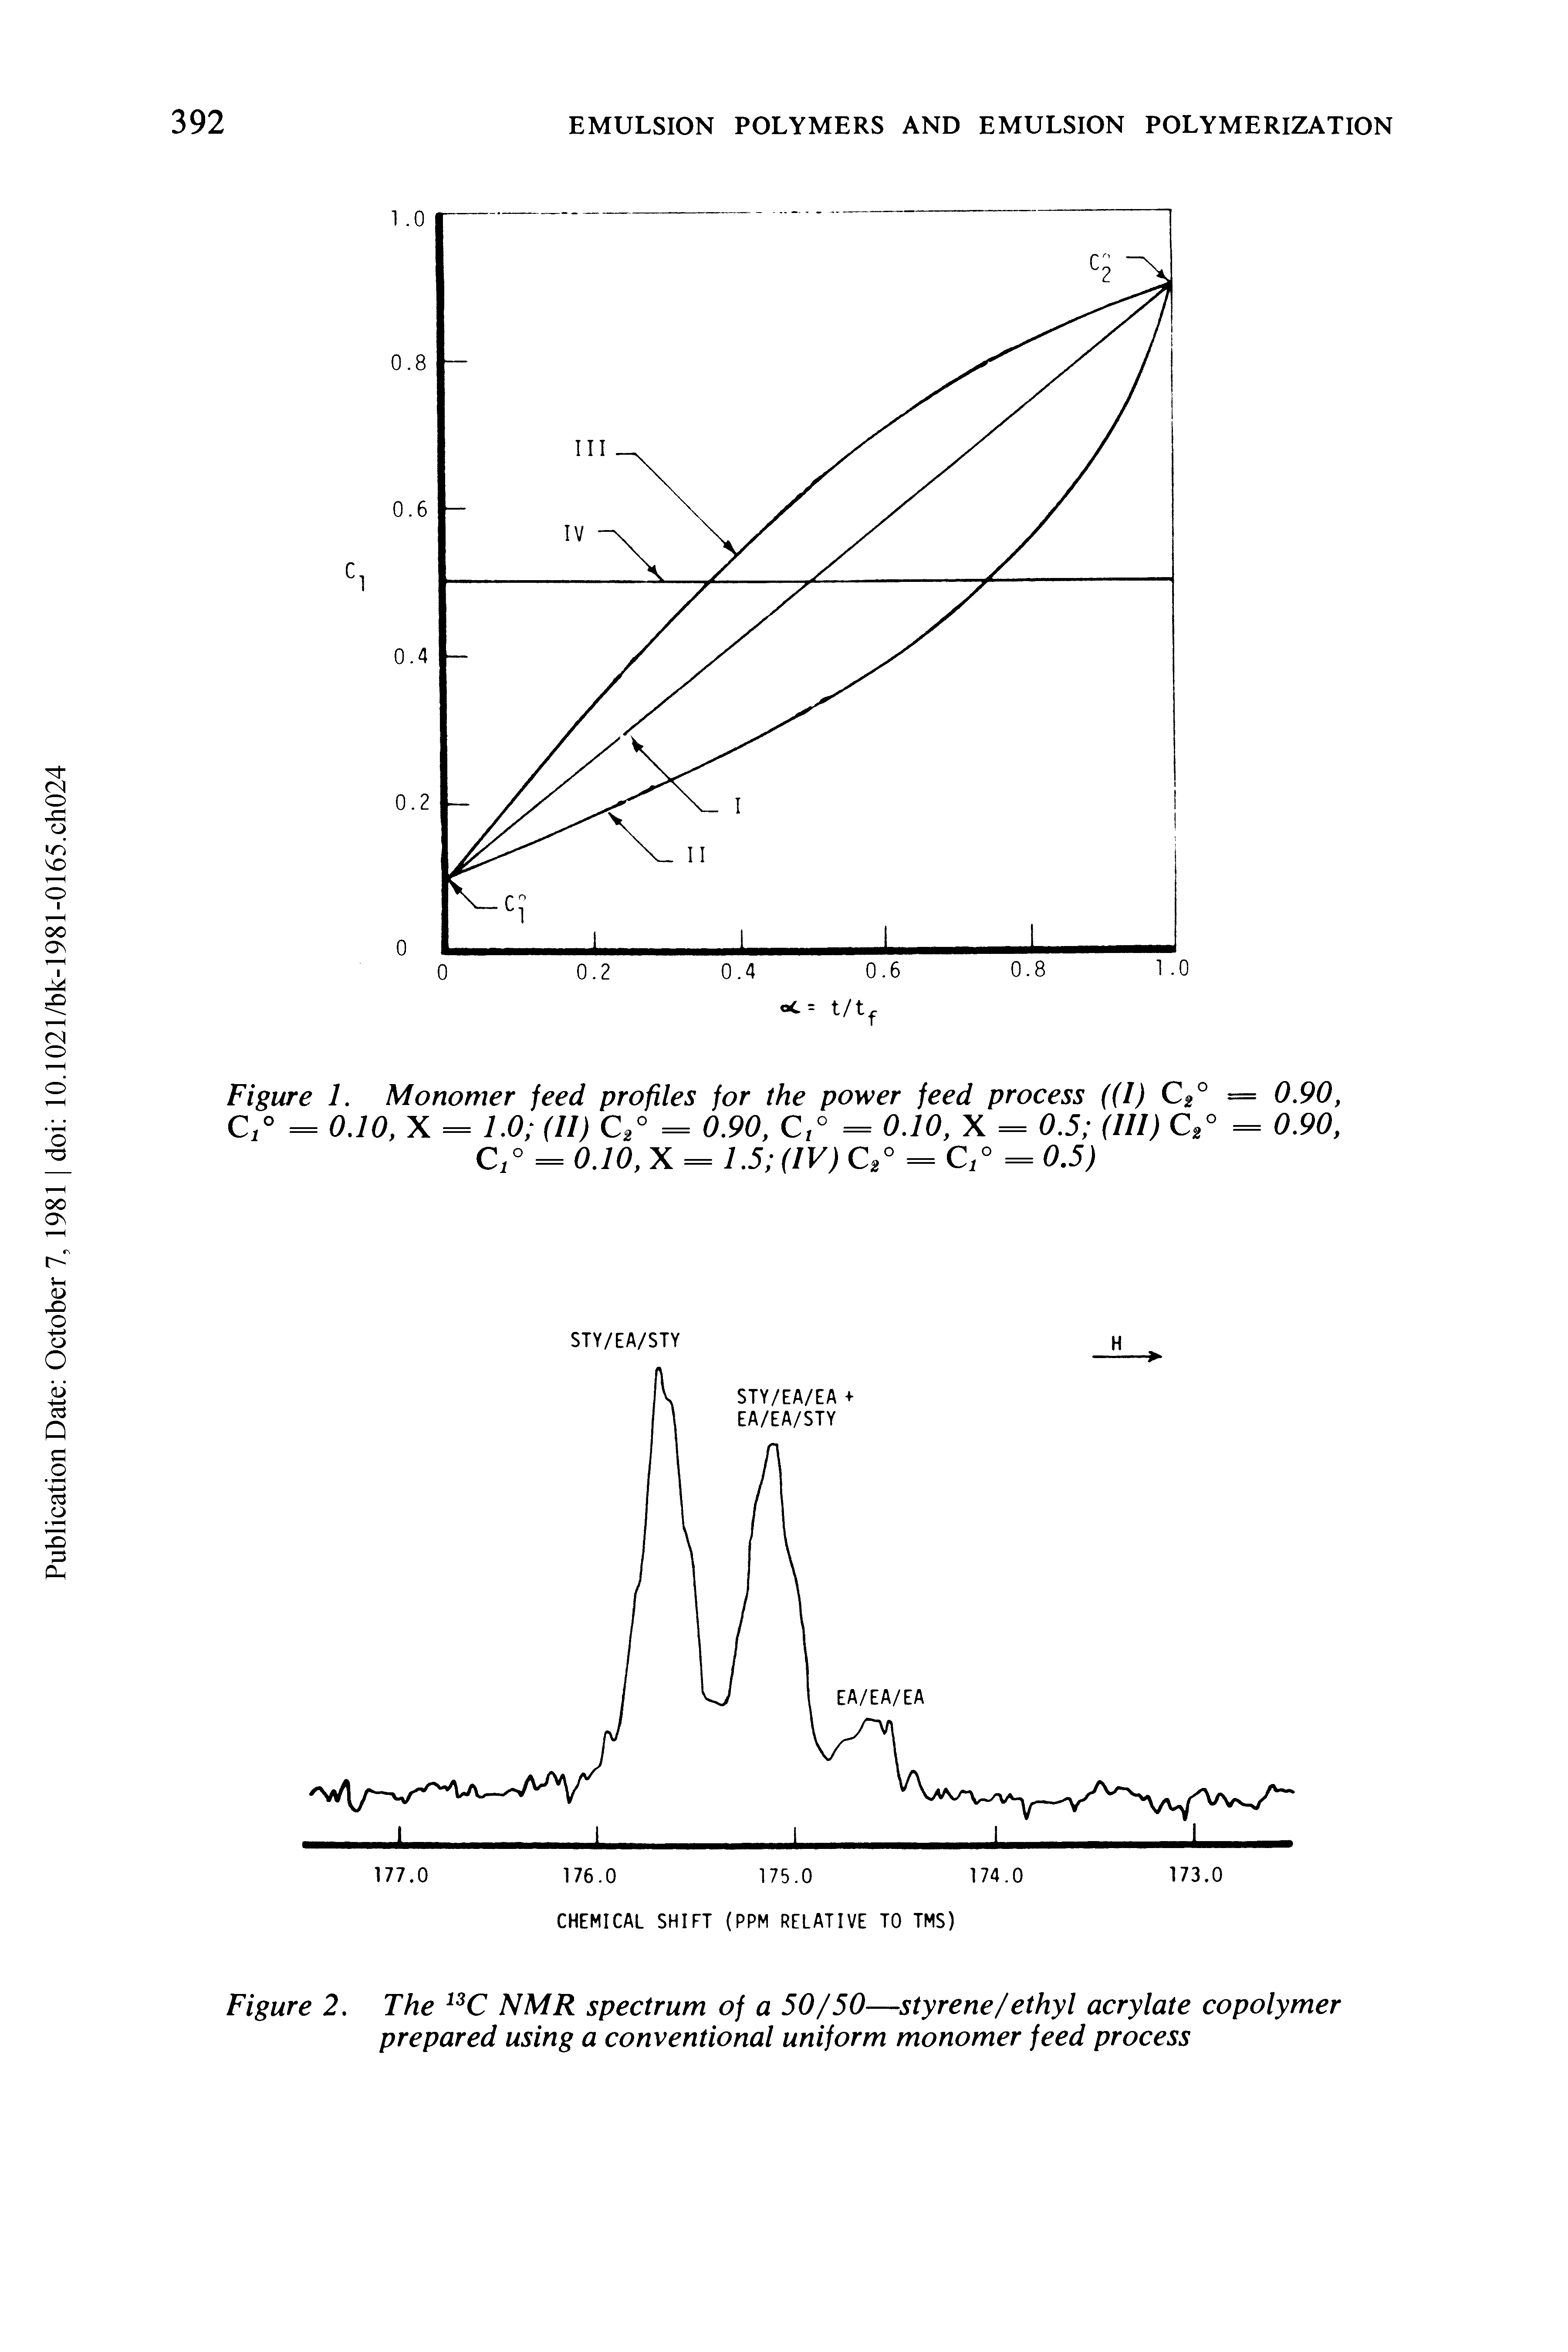 Figure 2. The 13C NMR spectrum of a 50/50—styrene/ethyl acrylate copolymer prepared using a conventional uniform monomer feed process...